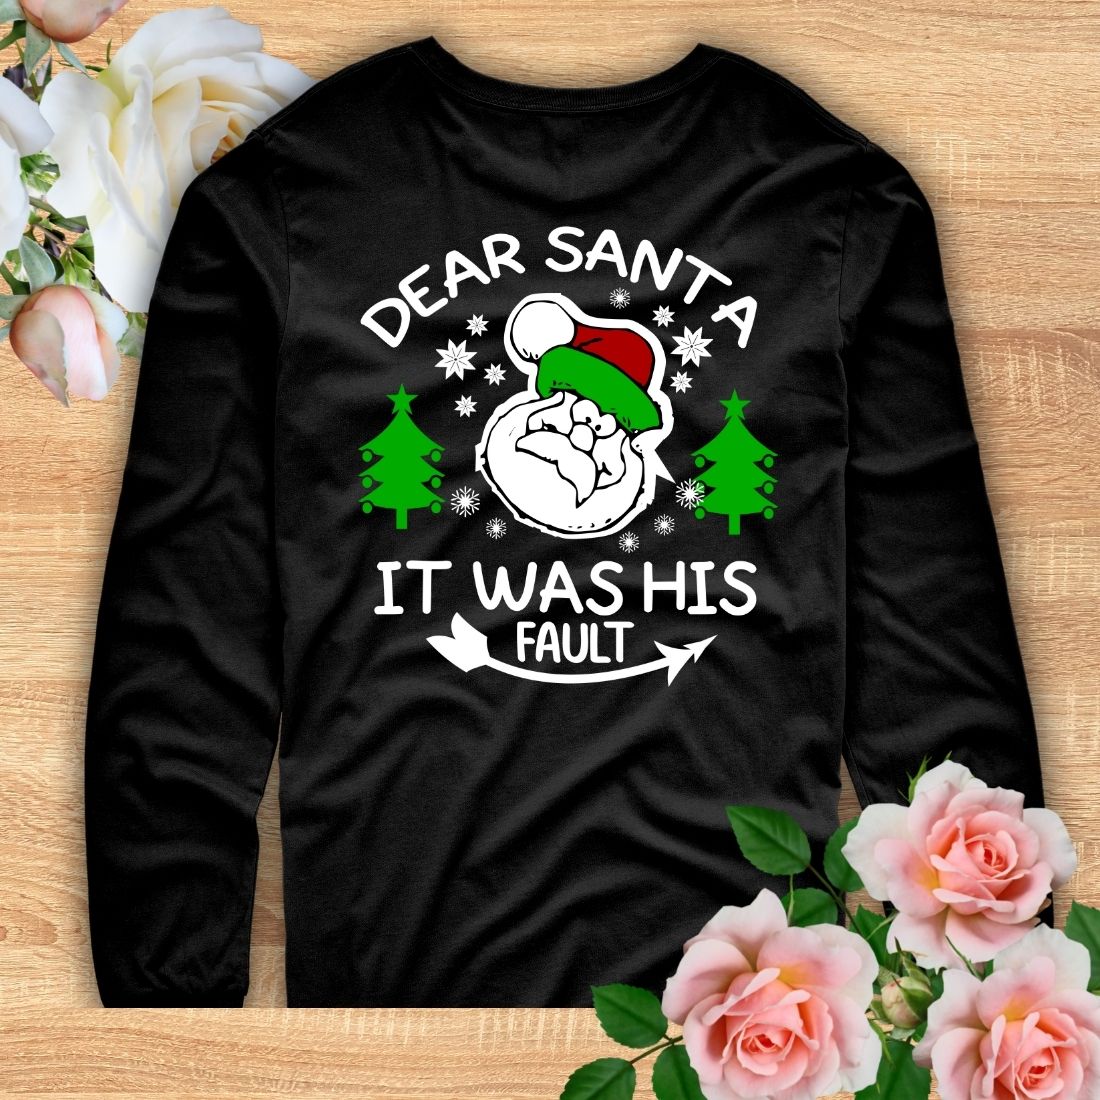 Image of a black sweatshirt with a beautiful print on the Christmas theme.